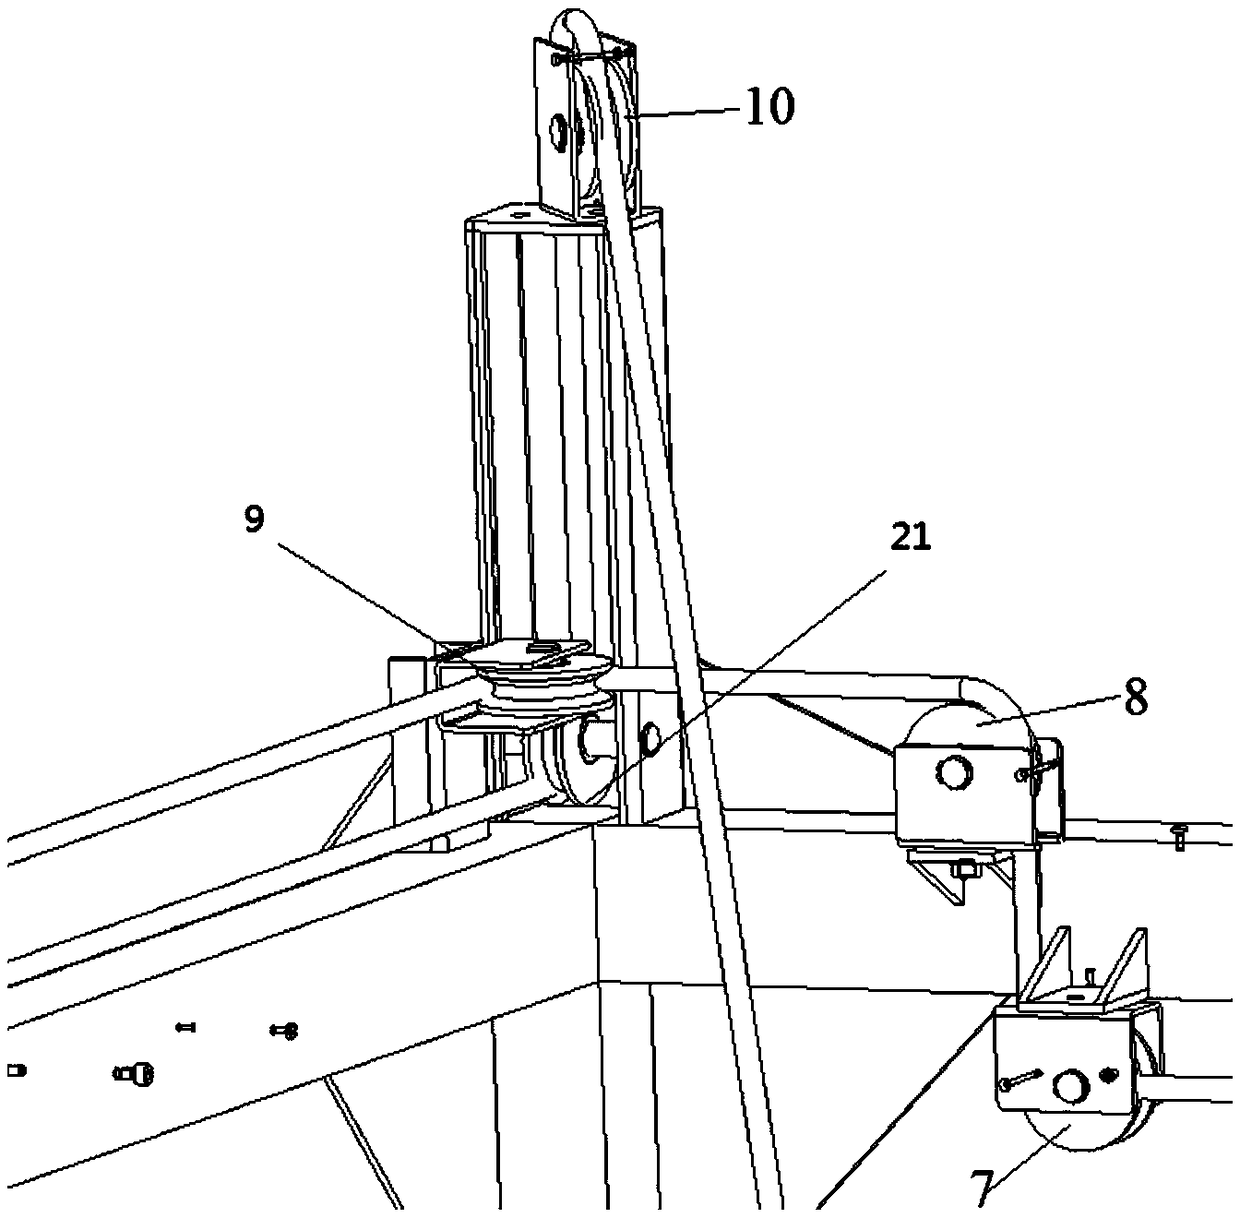 Aviation tray lifting and turnover device